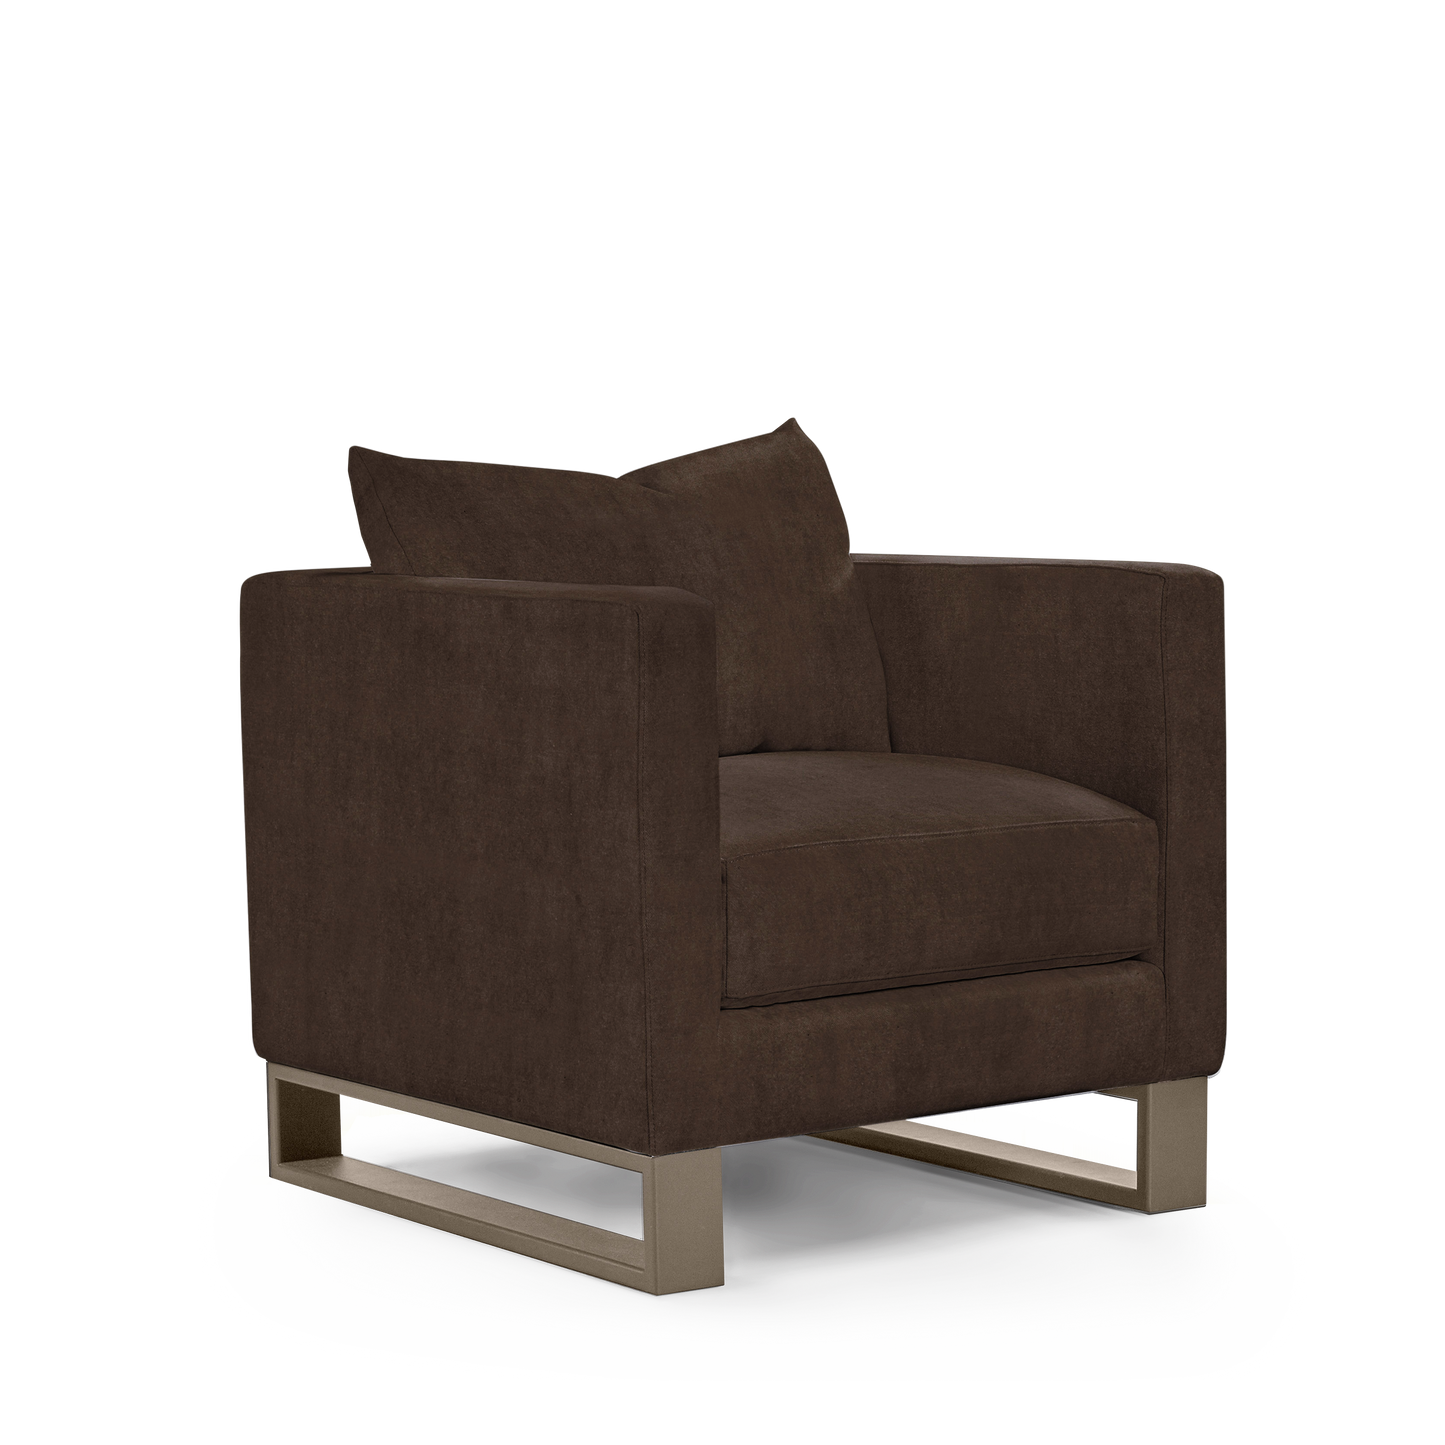 Atlin armchair with suede brown textile with champagne legs